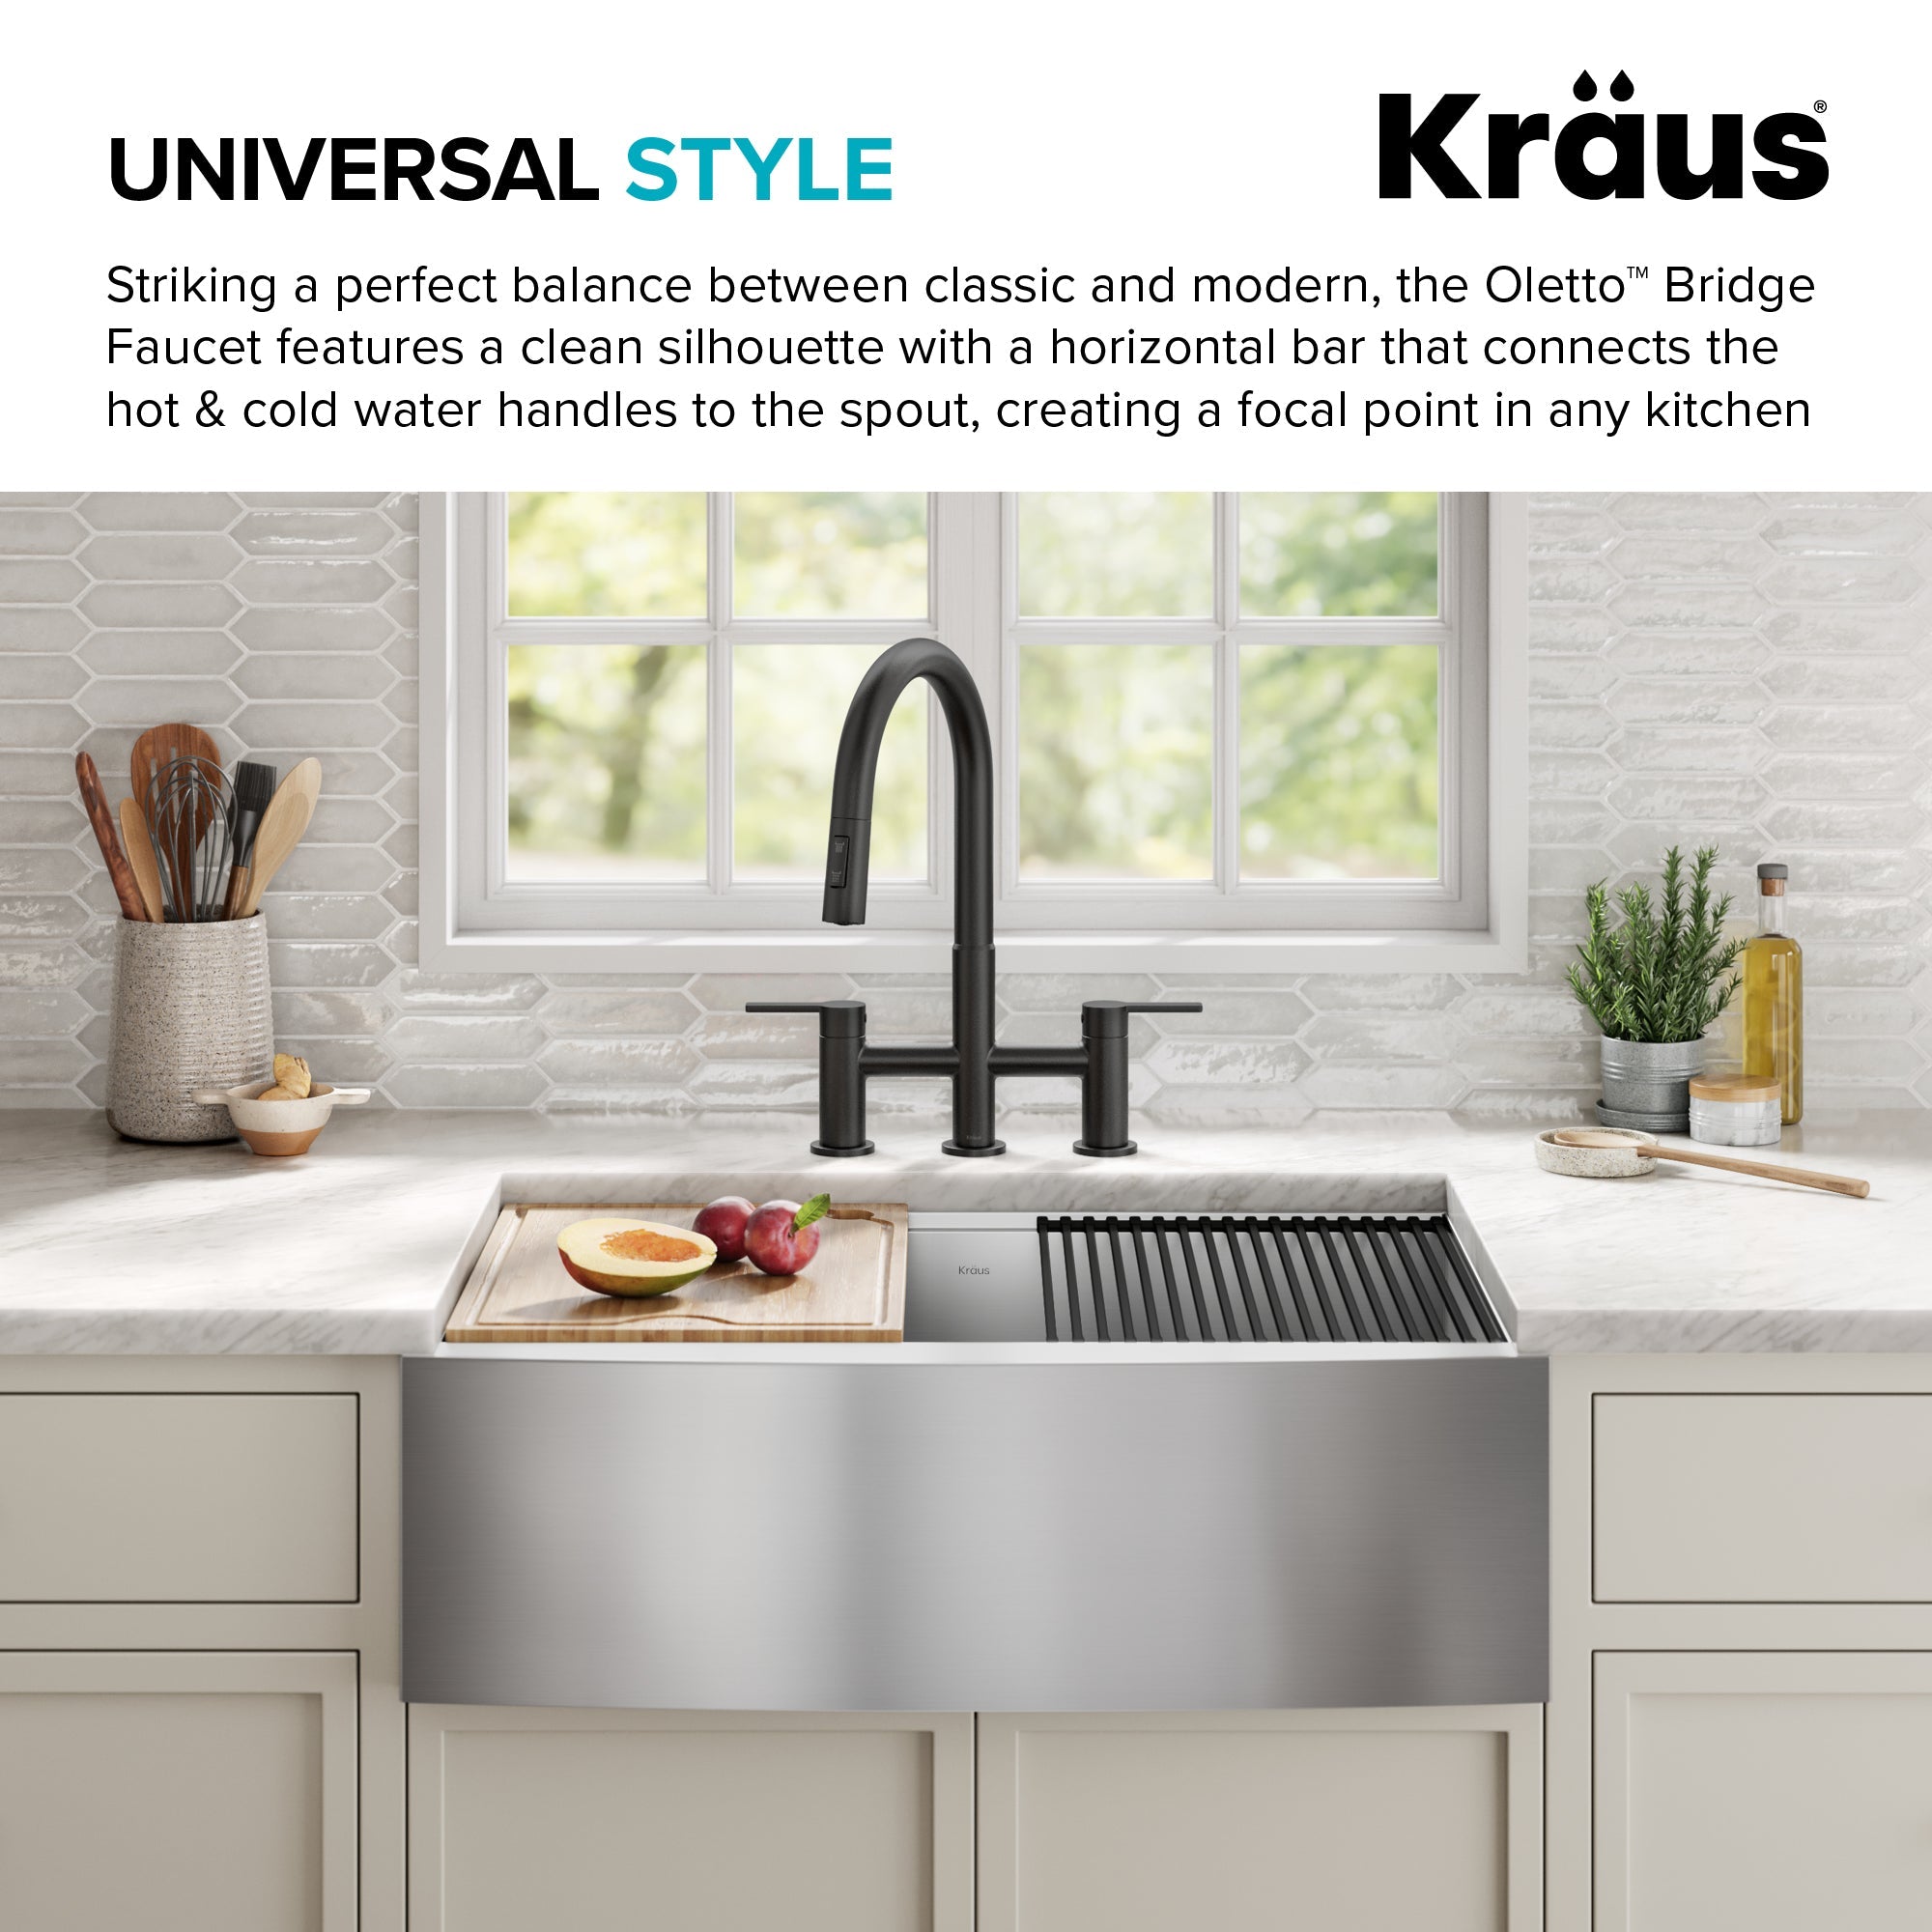 KRAUS Contemporary Bridge Kitchen Faucet with Spray-Head in Spot-Free Stainless